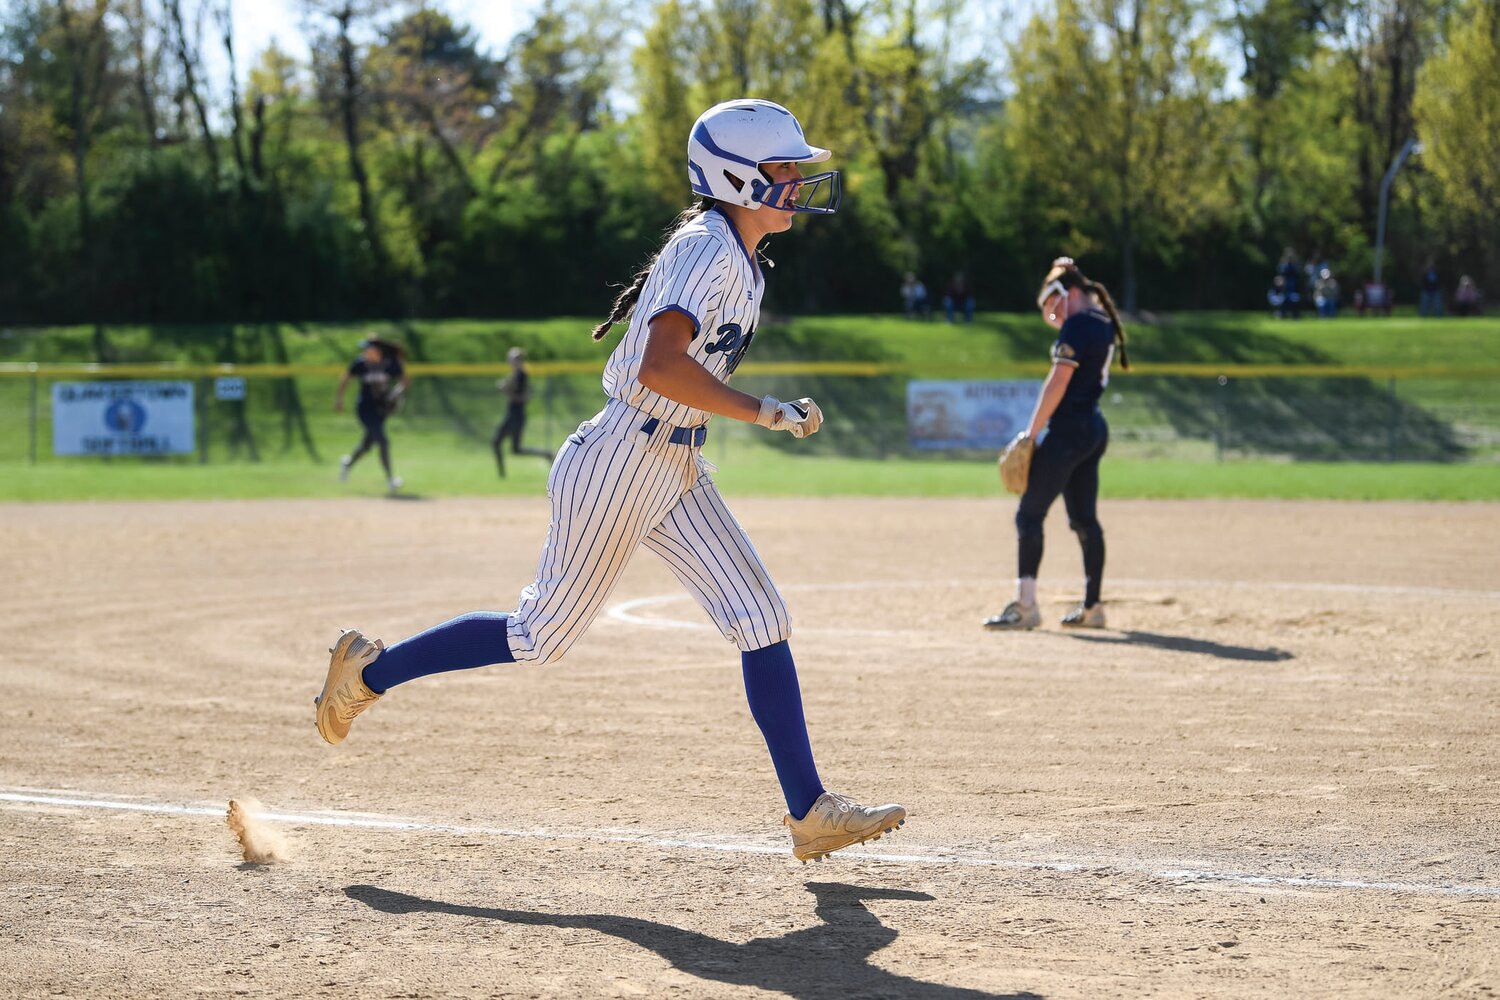 Quakertown’s Kira Jefferson trots home after a base hit made it 11-5 in the sixth inning.